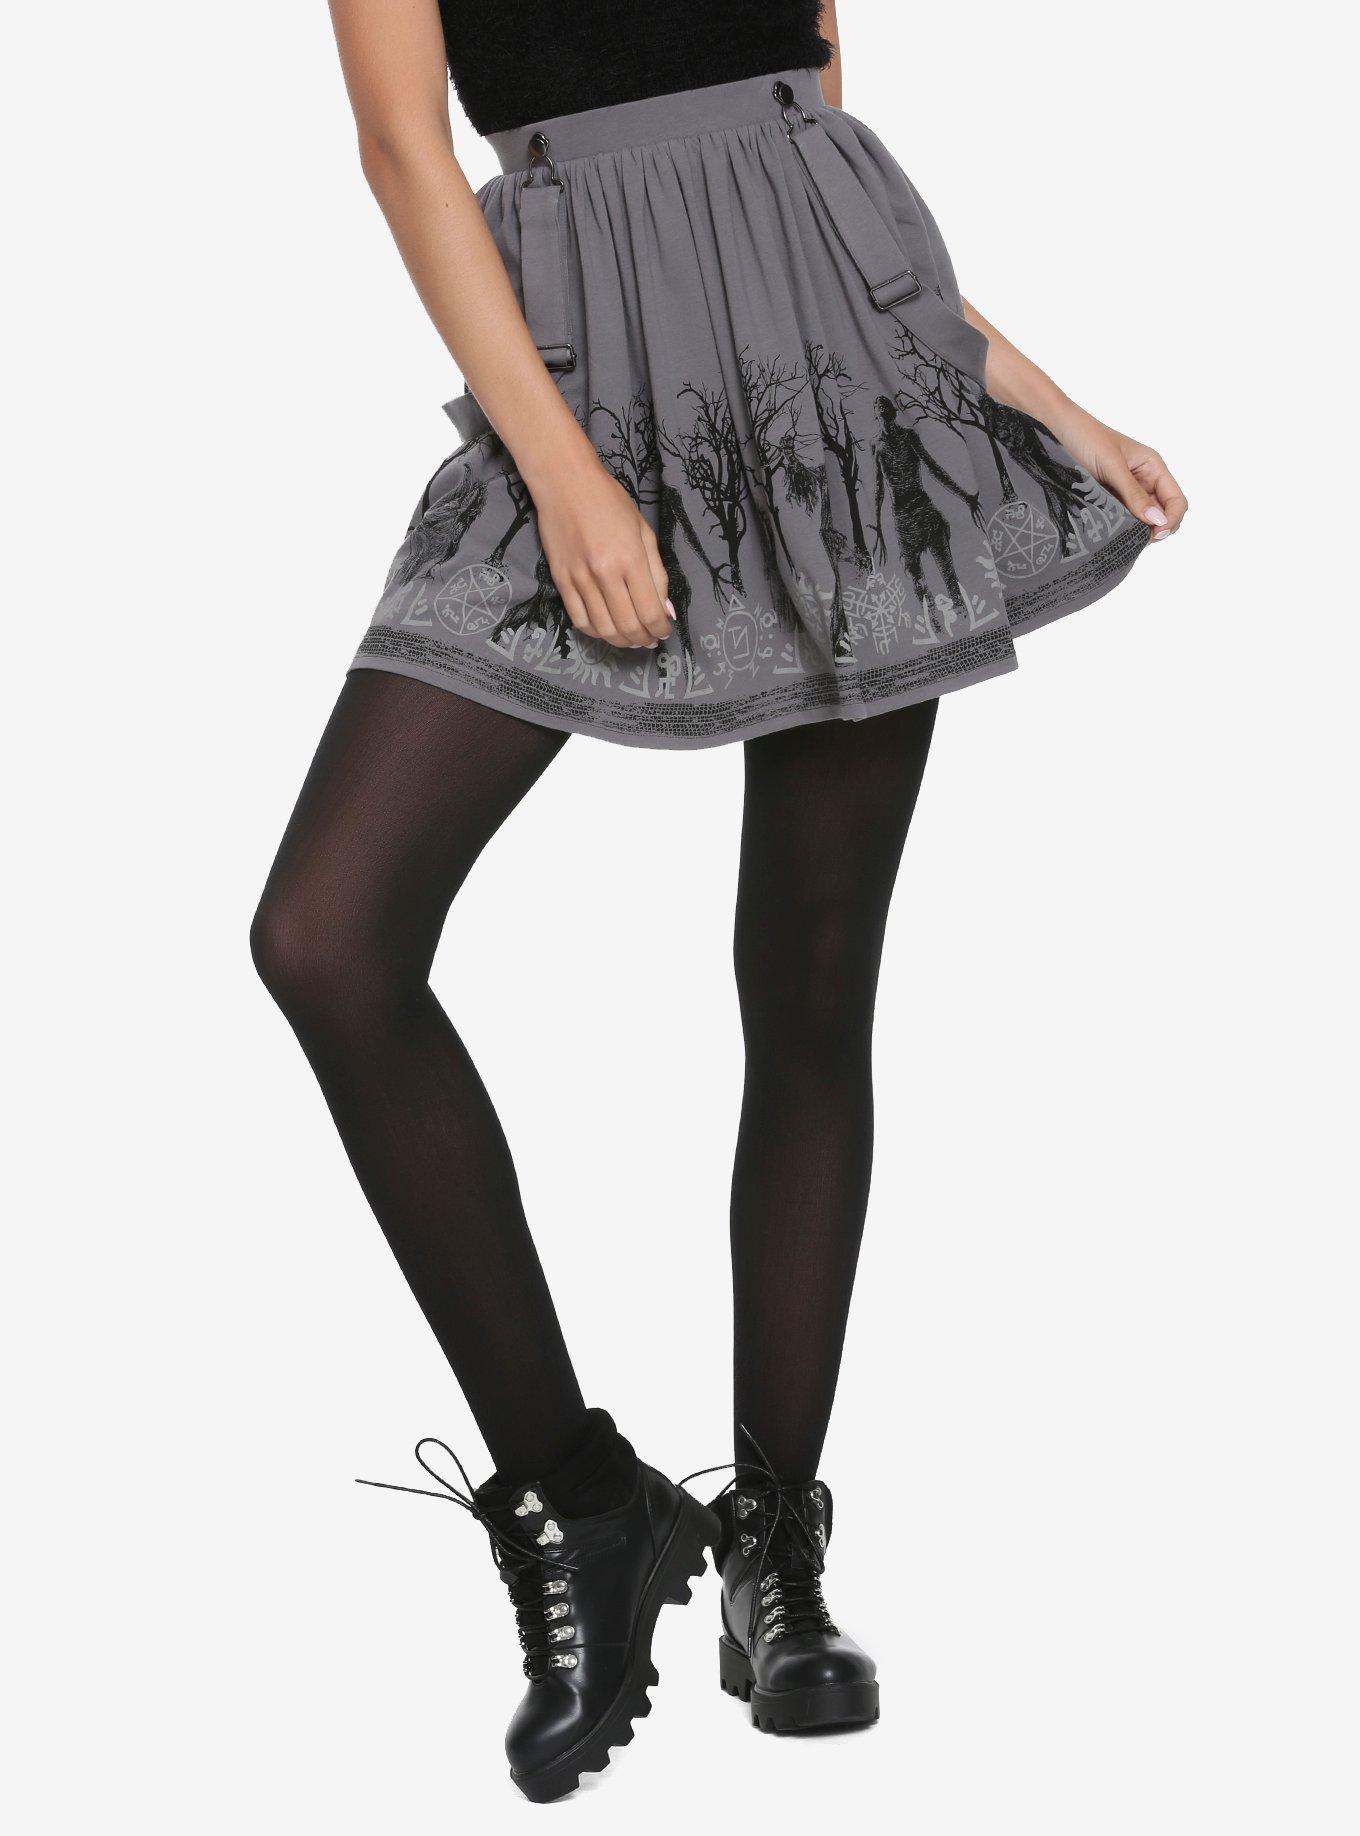 Supernatural Monsters Suspender Skirt Hot Topic Exclusive | Hot Topic